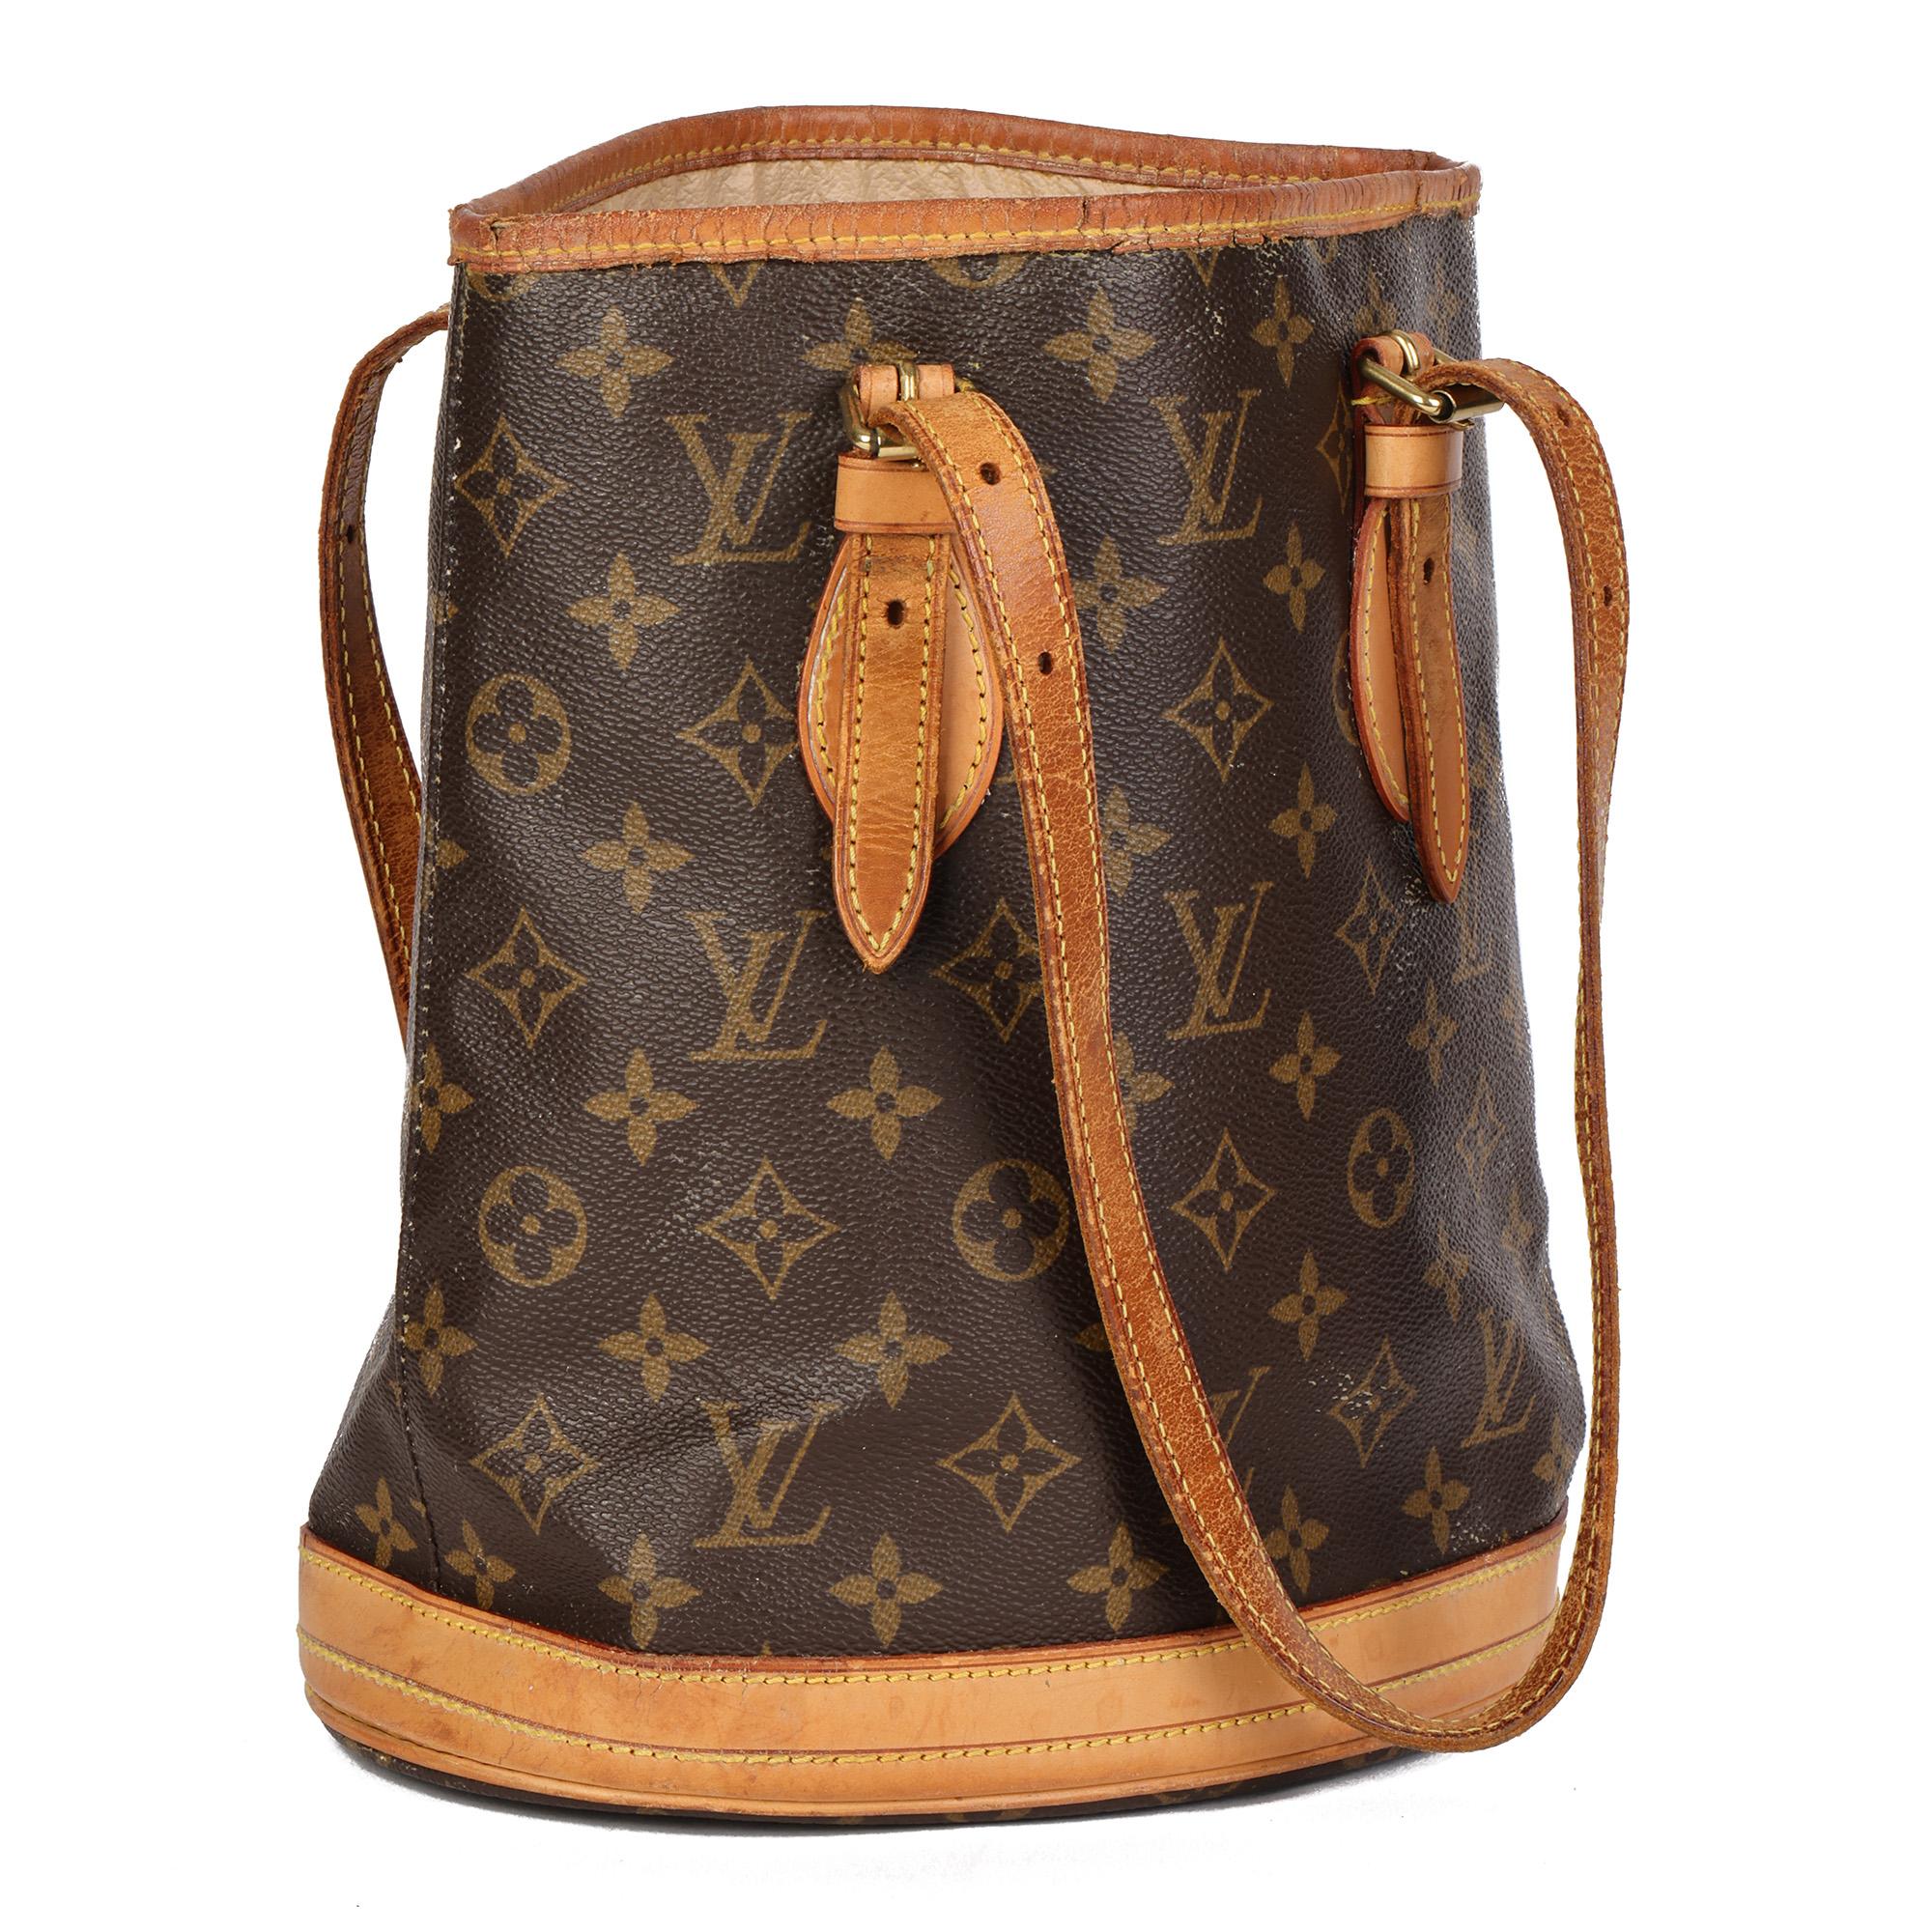 LOUIS VUITTON
Brown Monogram Coated Canvas & Vachetta Leather Vintage Bucket Bag PM

Serial Number: FL0031
Age (Circa): 2001
Authenticity Details: Date Stamp (Made in France)
Gender: Ladies
Type: Shoulder, Tote

Colour: Brown
Hardware: Golden